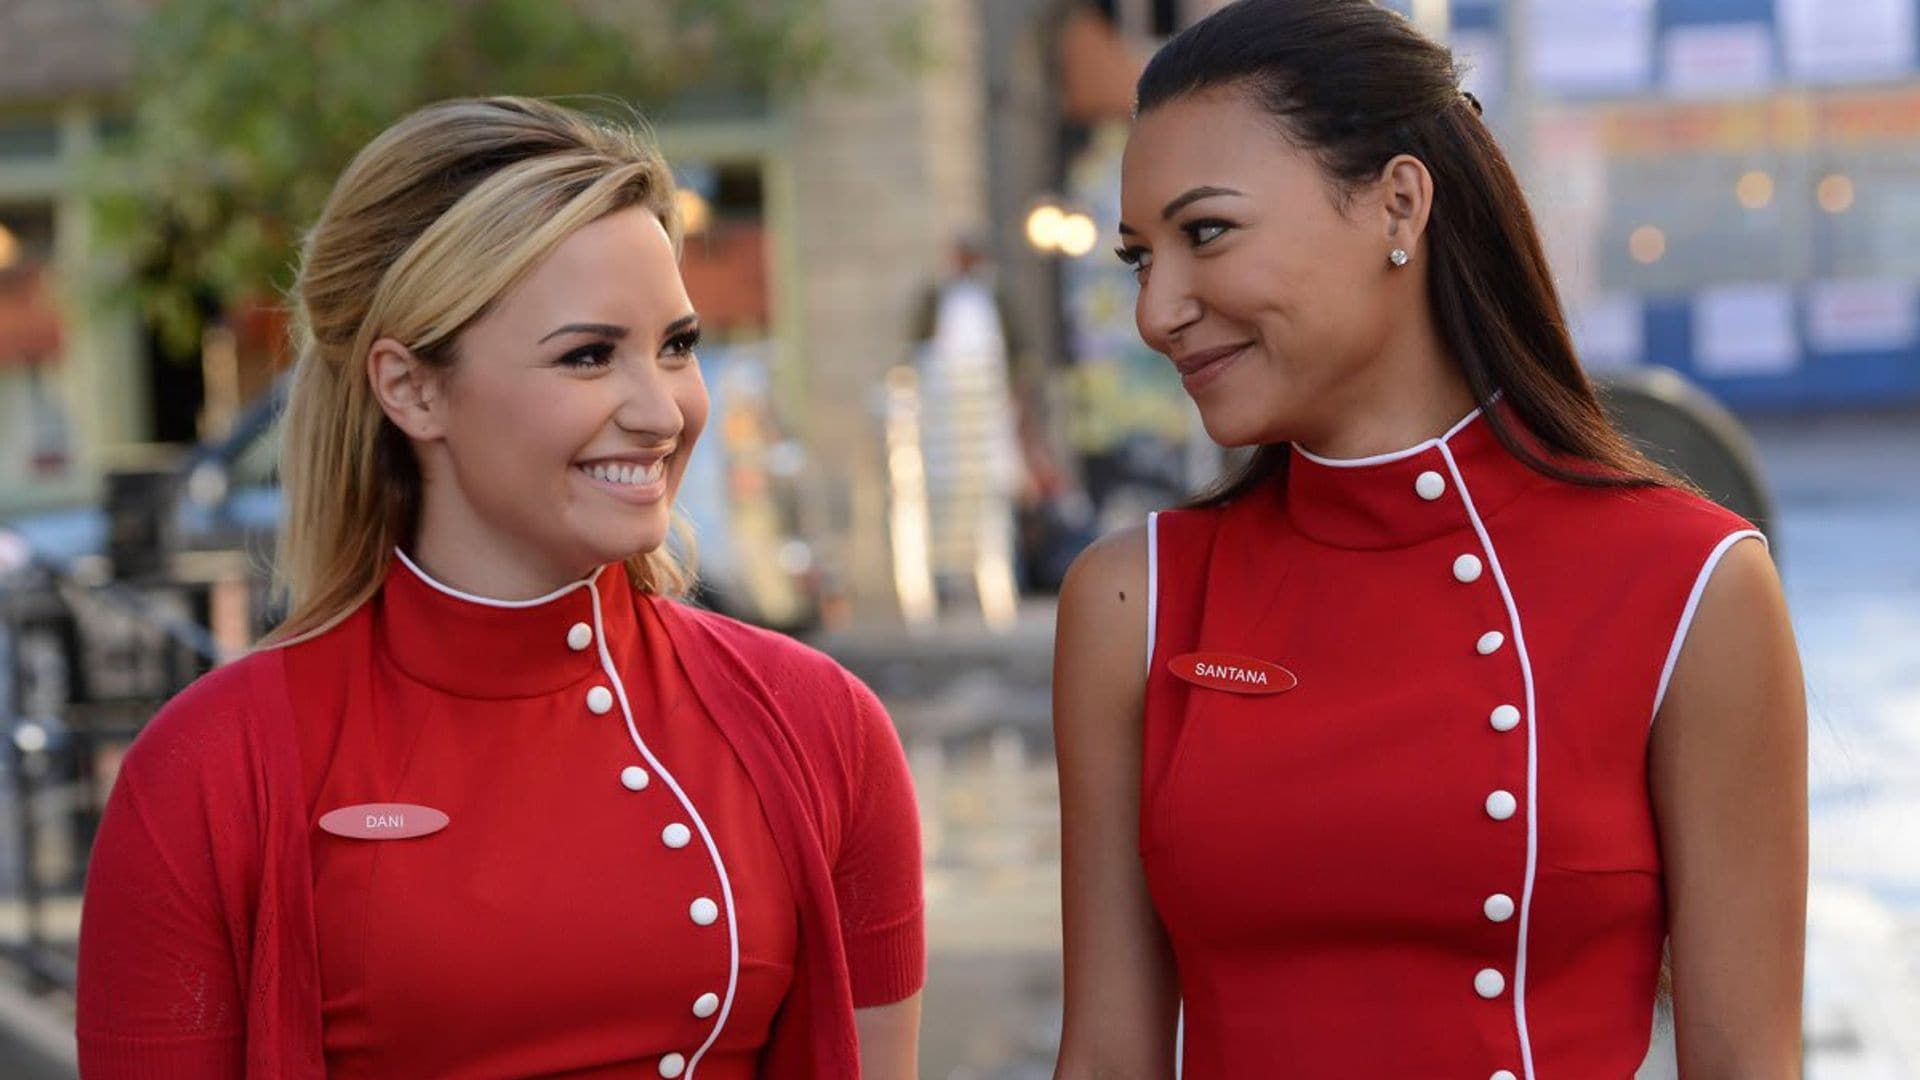 Watch the cast of ‘Glee’ and Demi Lovato honor her life 10 years after her character ‘Santana’ was born